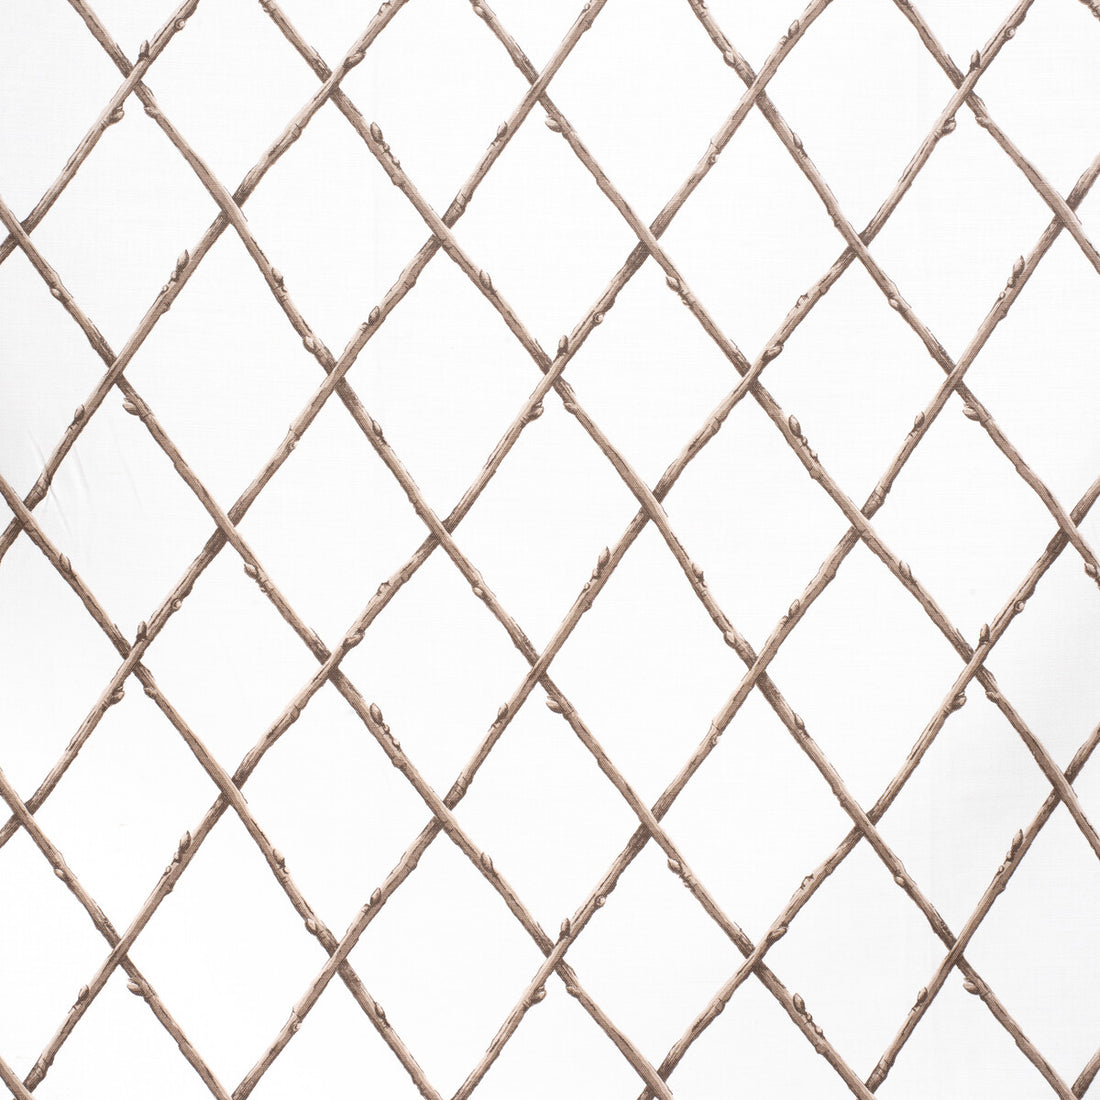 Bare Twig Trellis fabric in bro/whi color - pattern 2020116.1116.0 - by Lee Jofa in the Paolo Moschino Fabrics collection